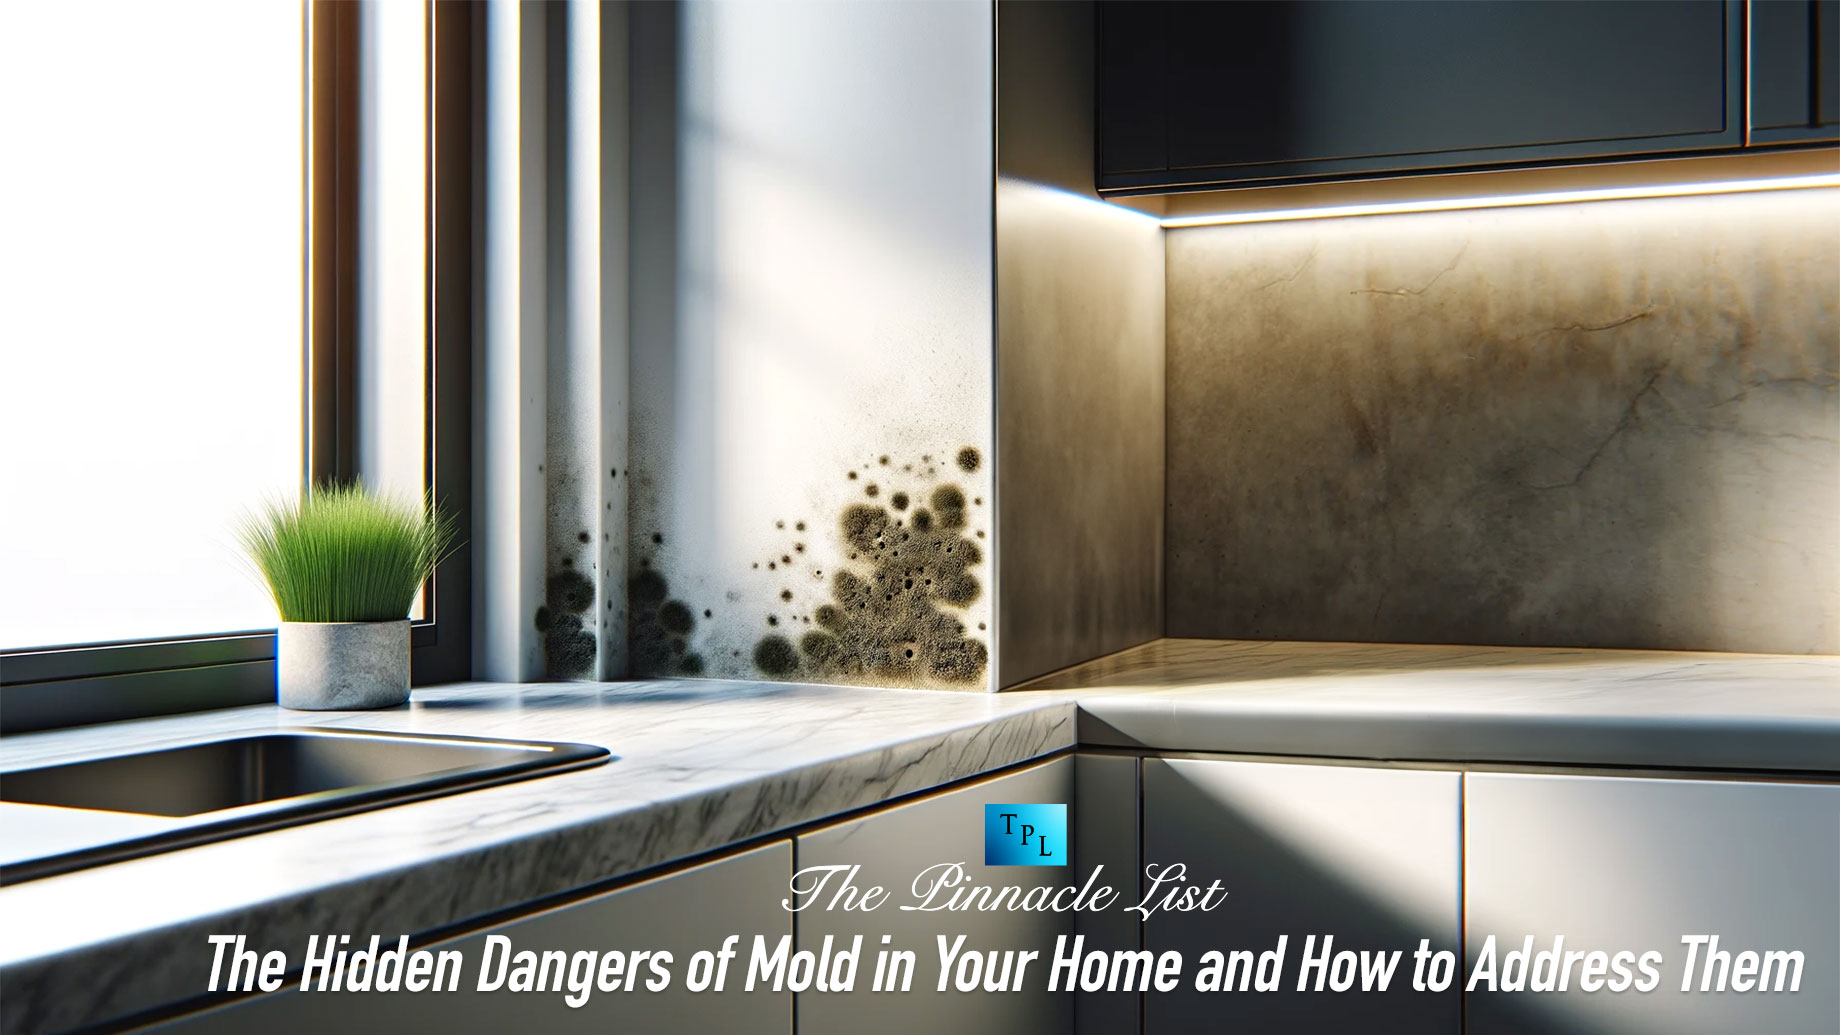 The Hidden Dangers of Mold in Your Home and How to Address Them